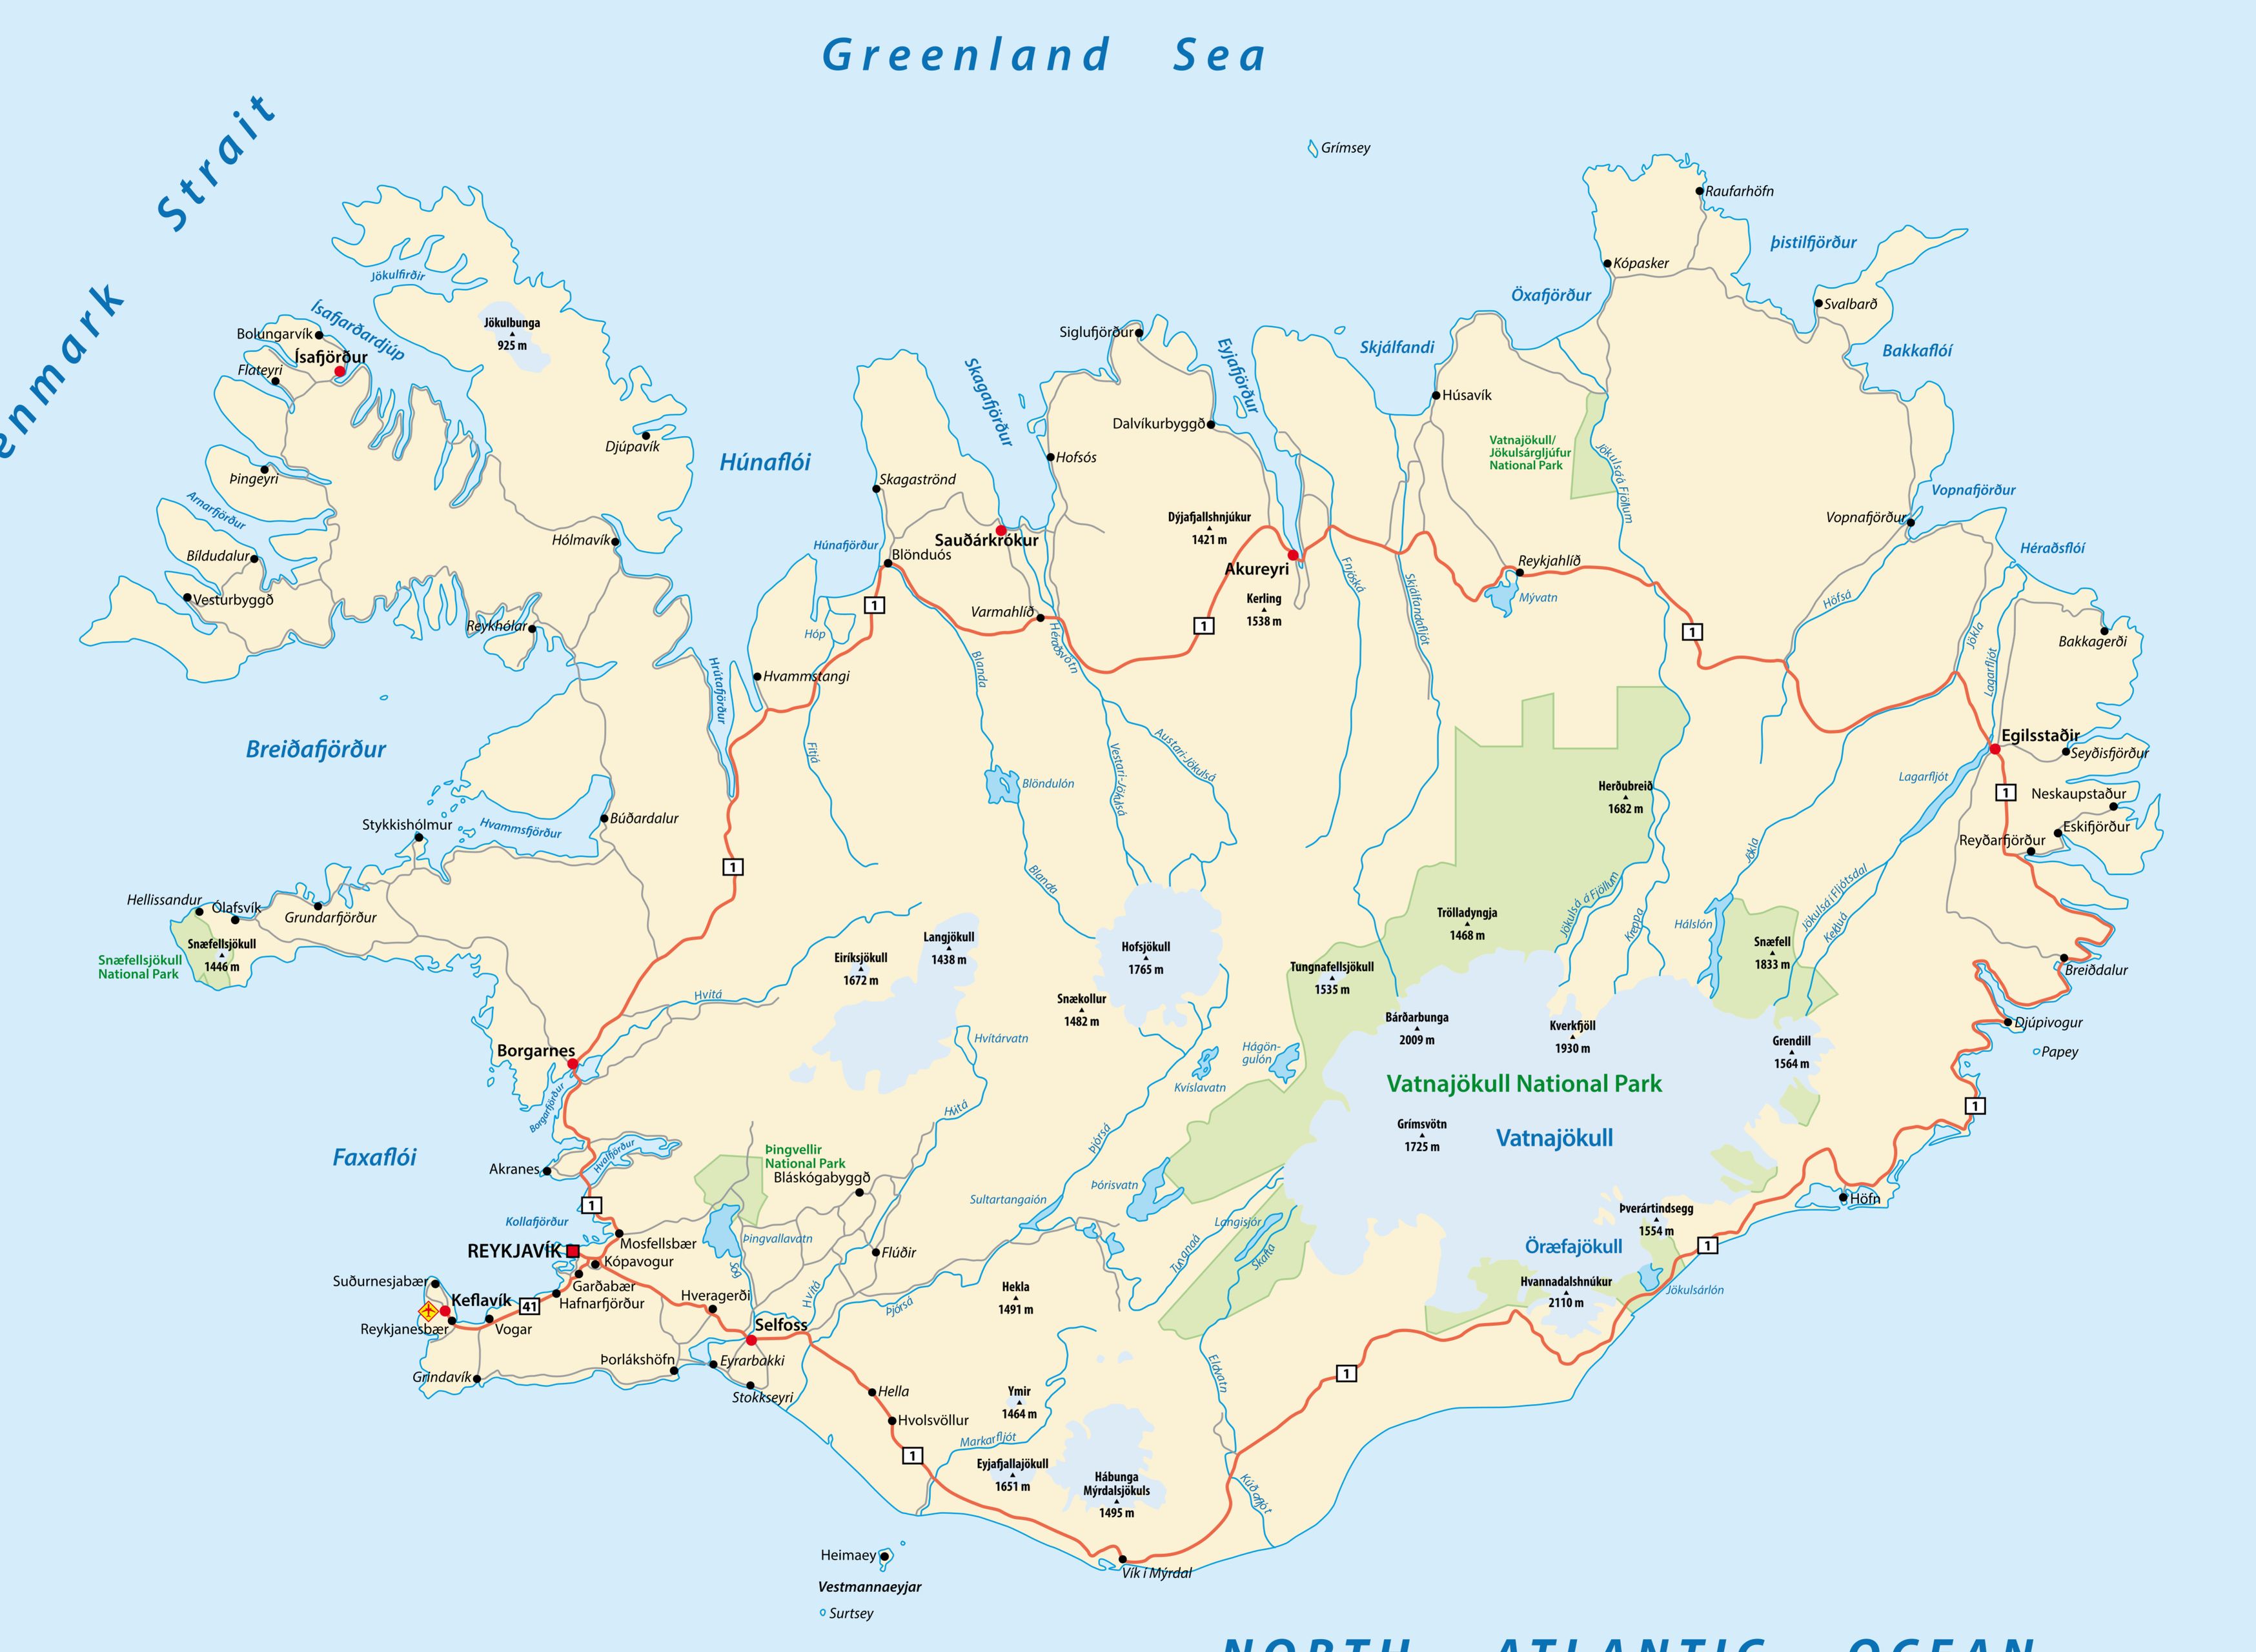 map of Iceland where you can see the size of its glaciers compared to the island 